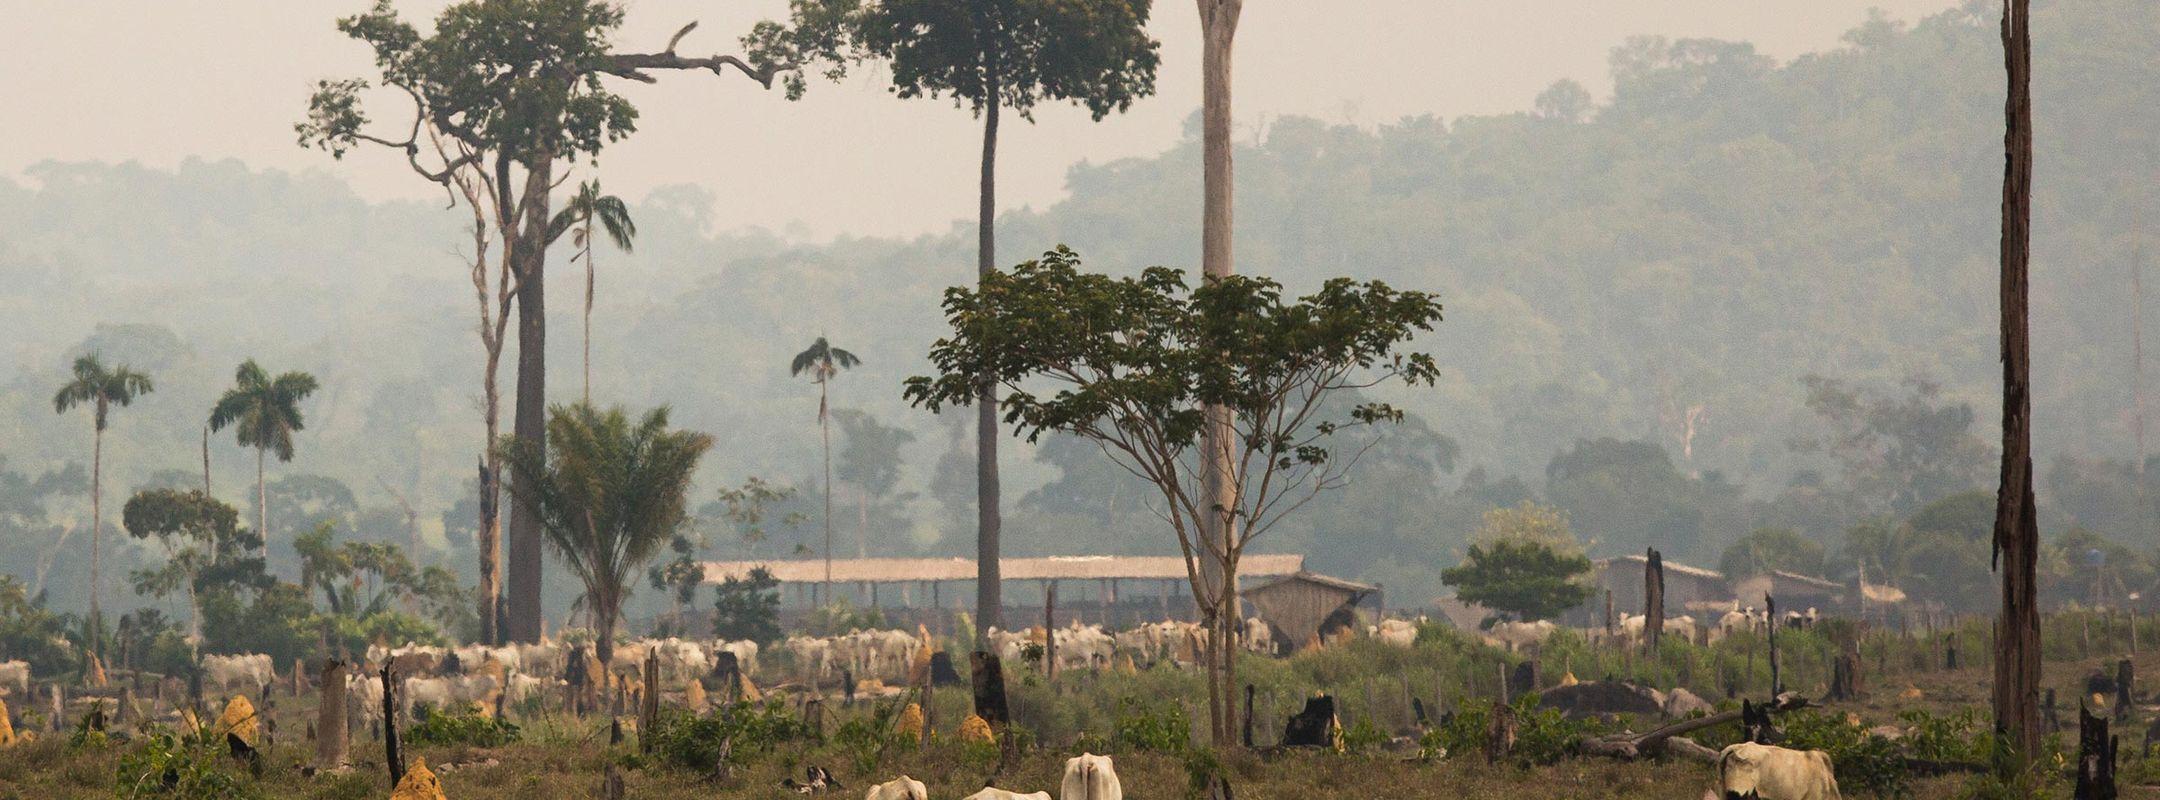 Cattle in the Amazon